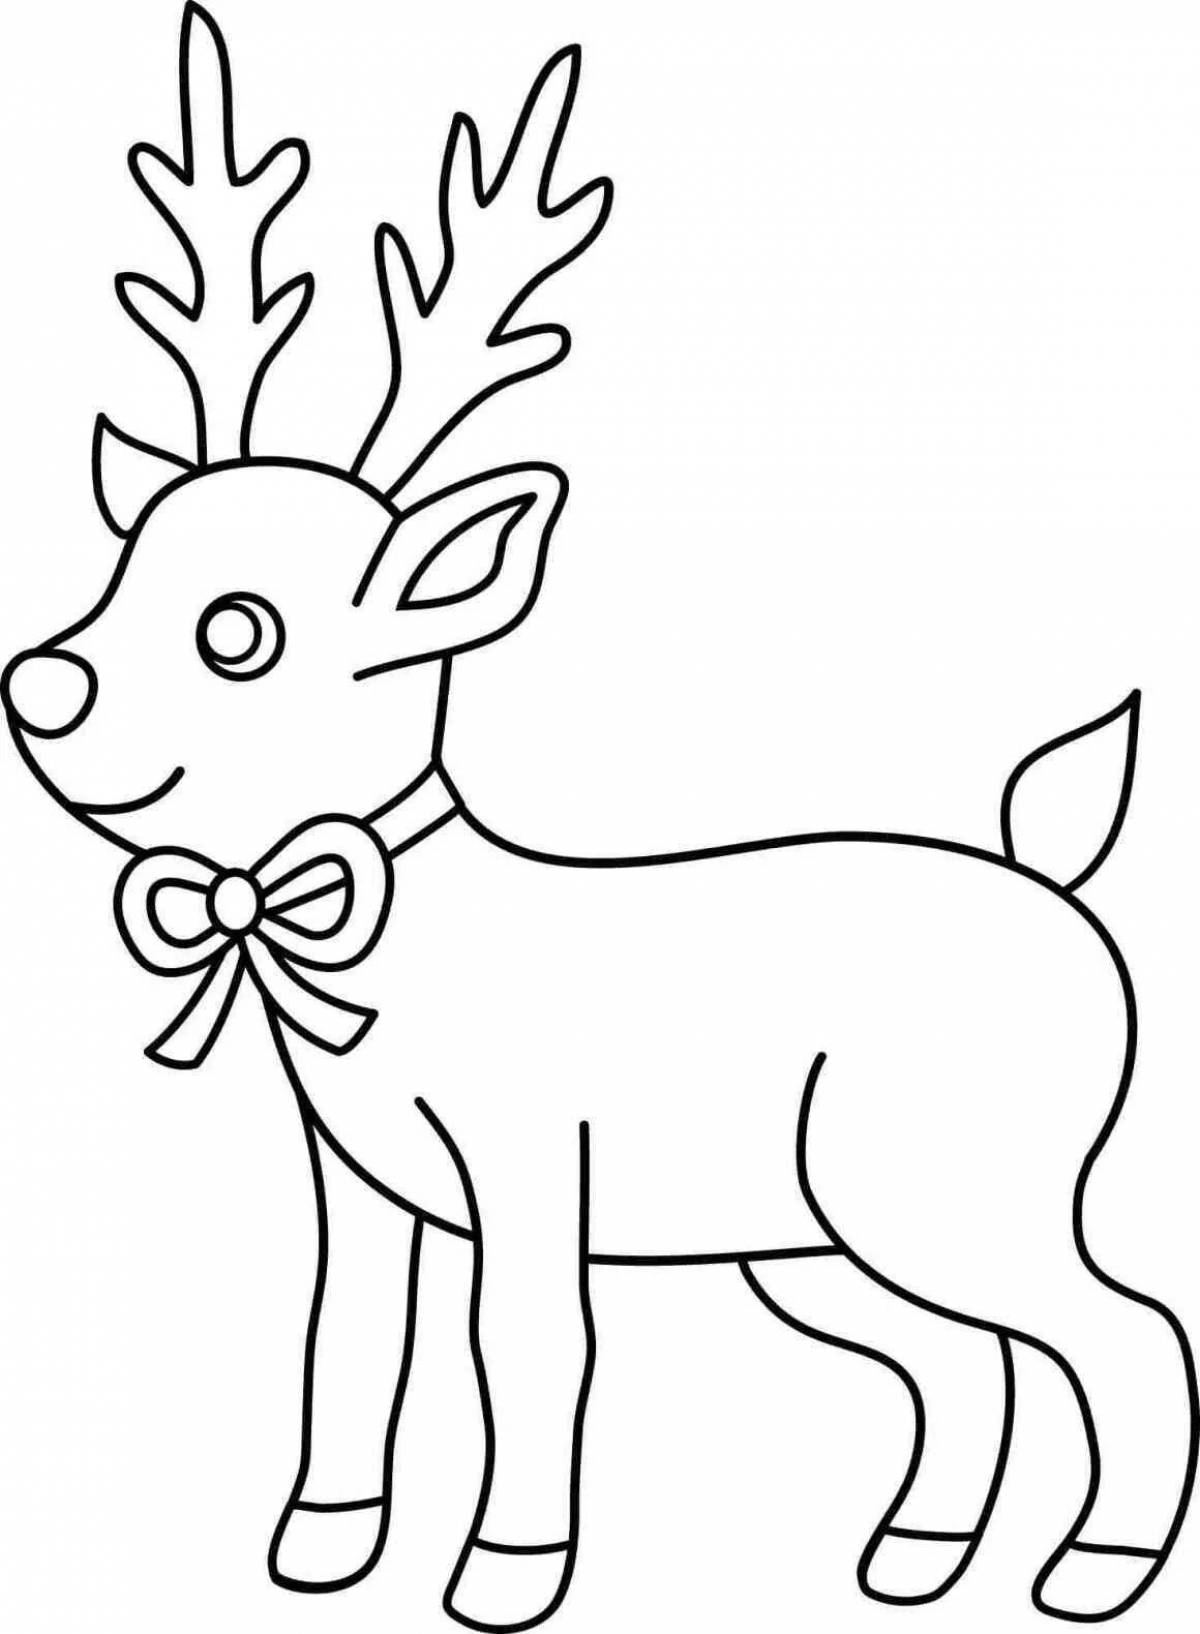 Glitter Christmas reindeer coloring page